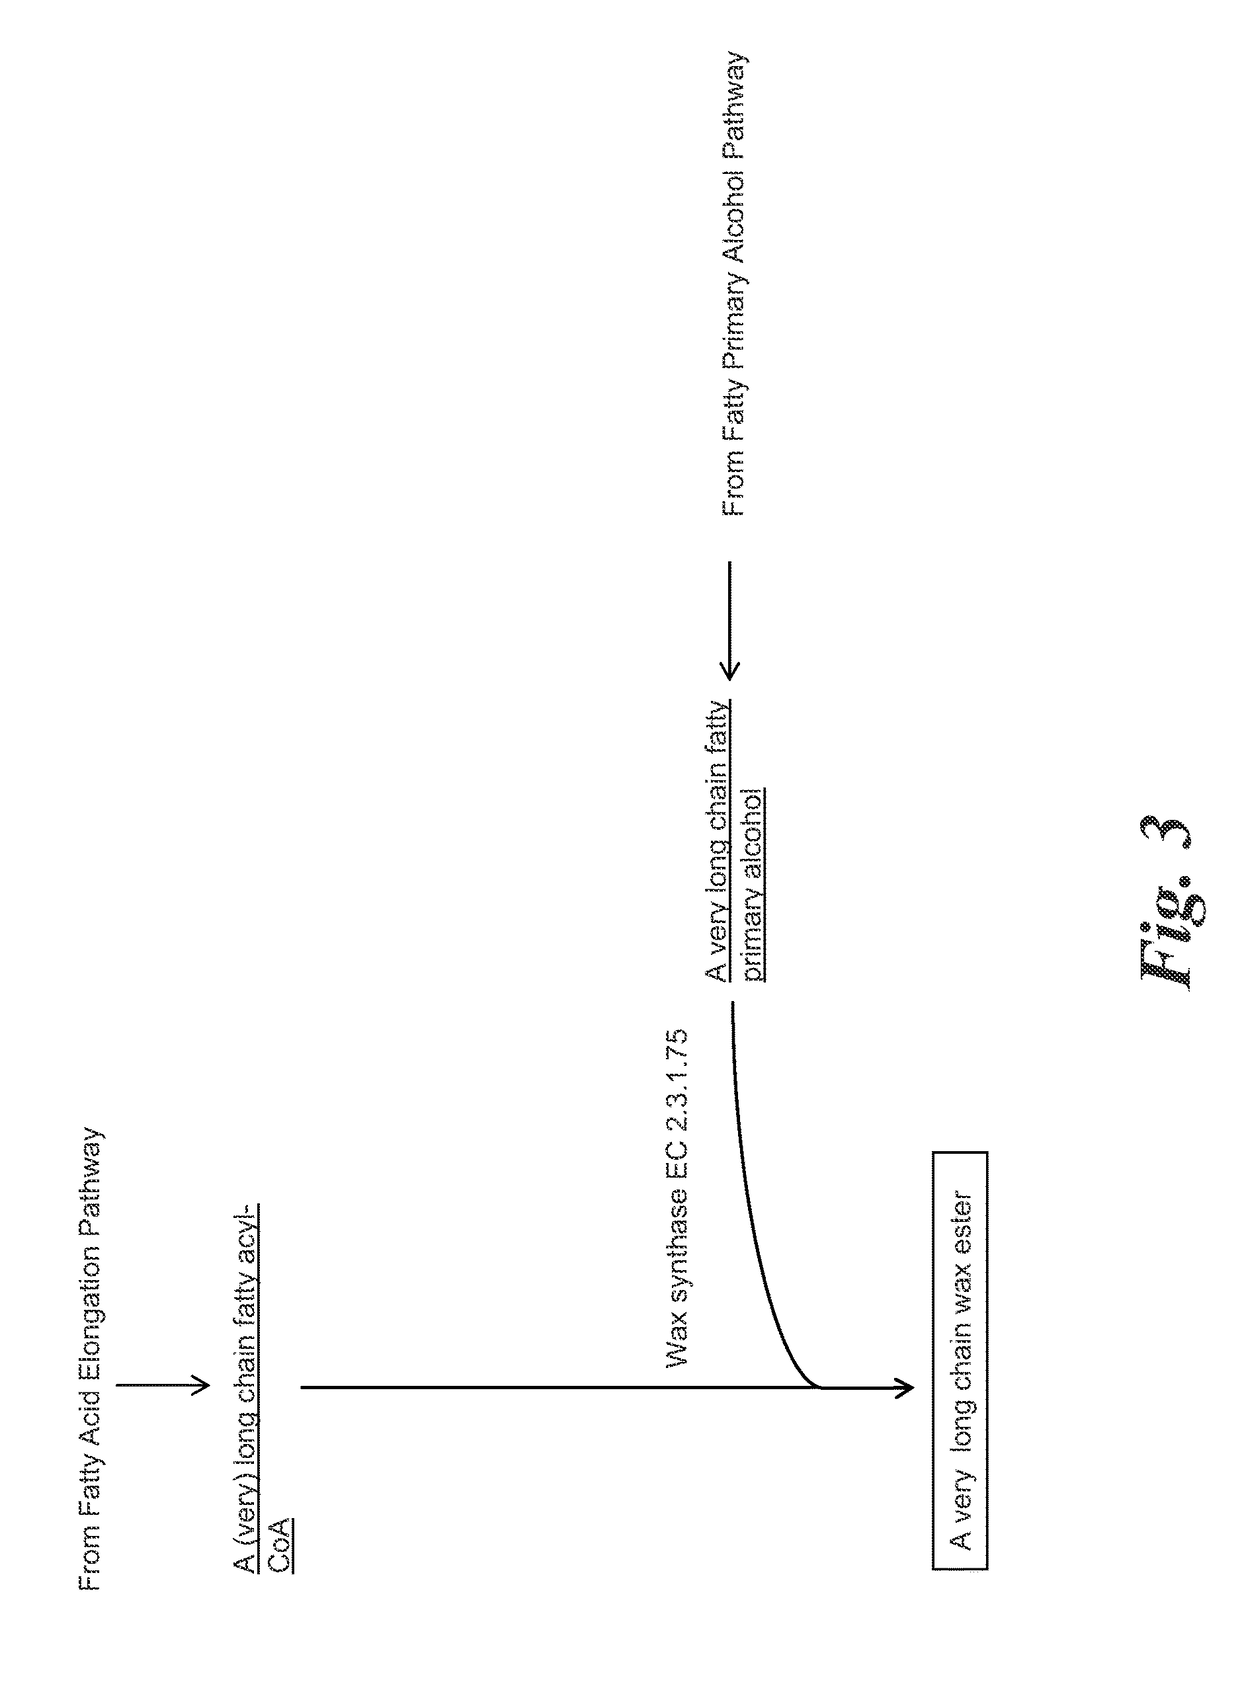 Methods for biological production of very long carbon chain compounds